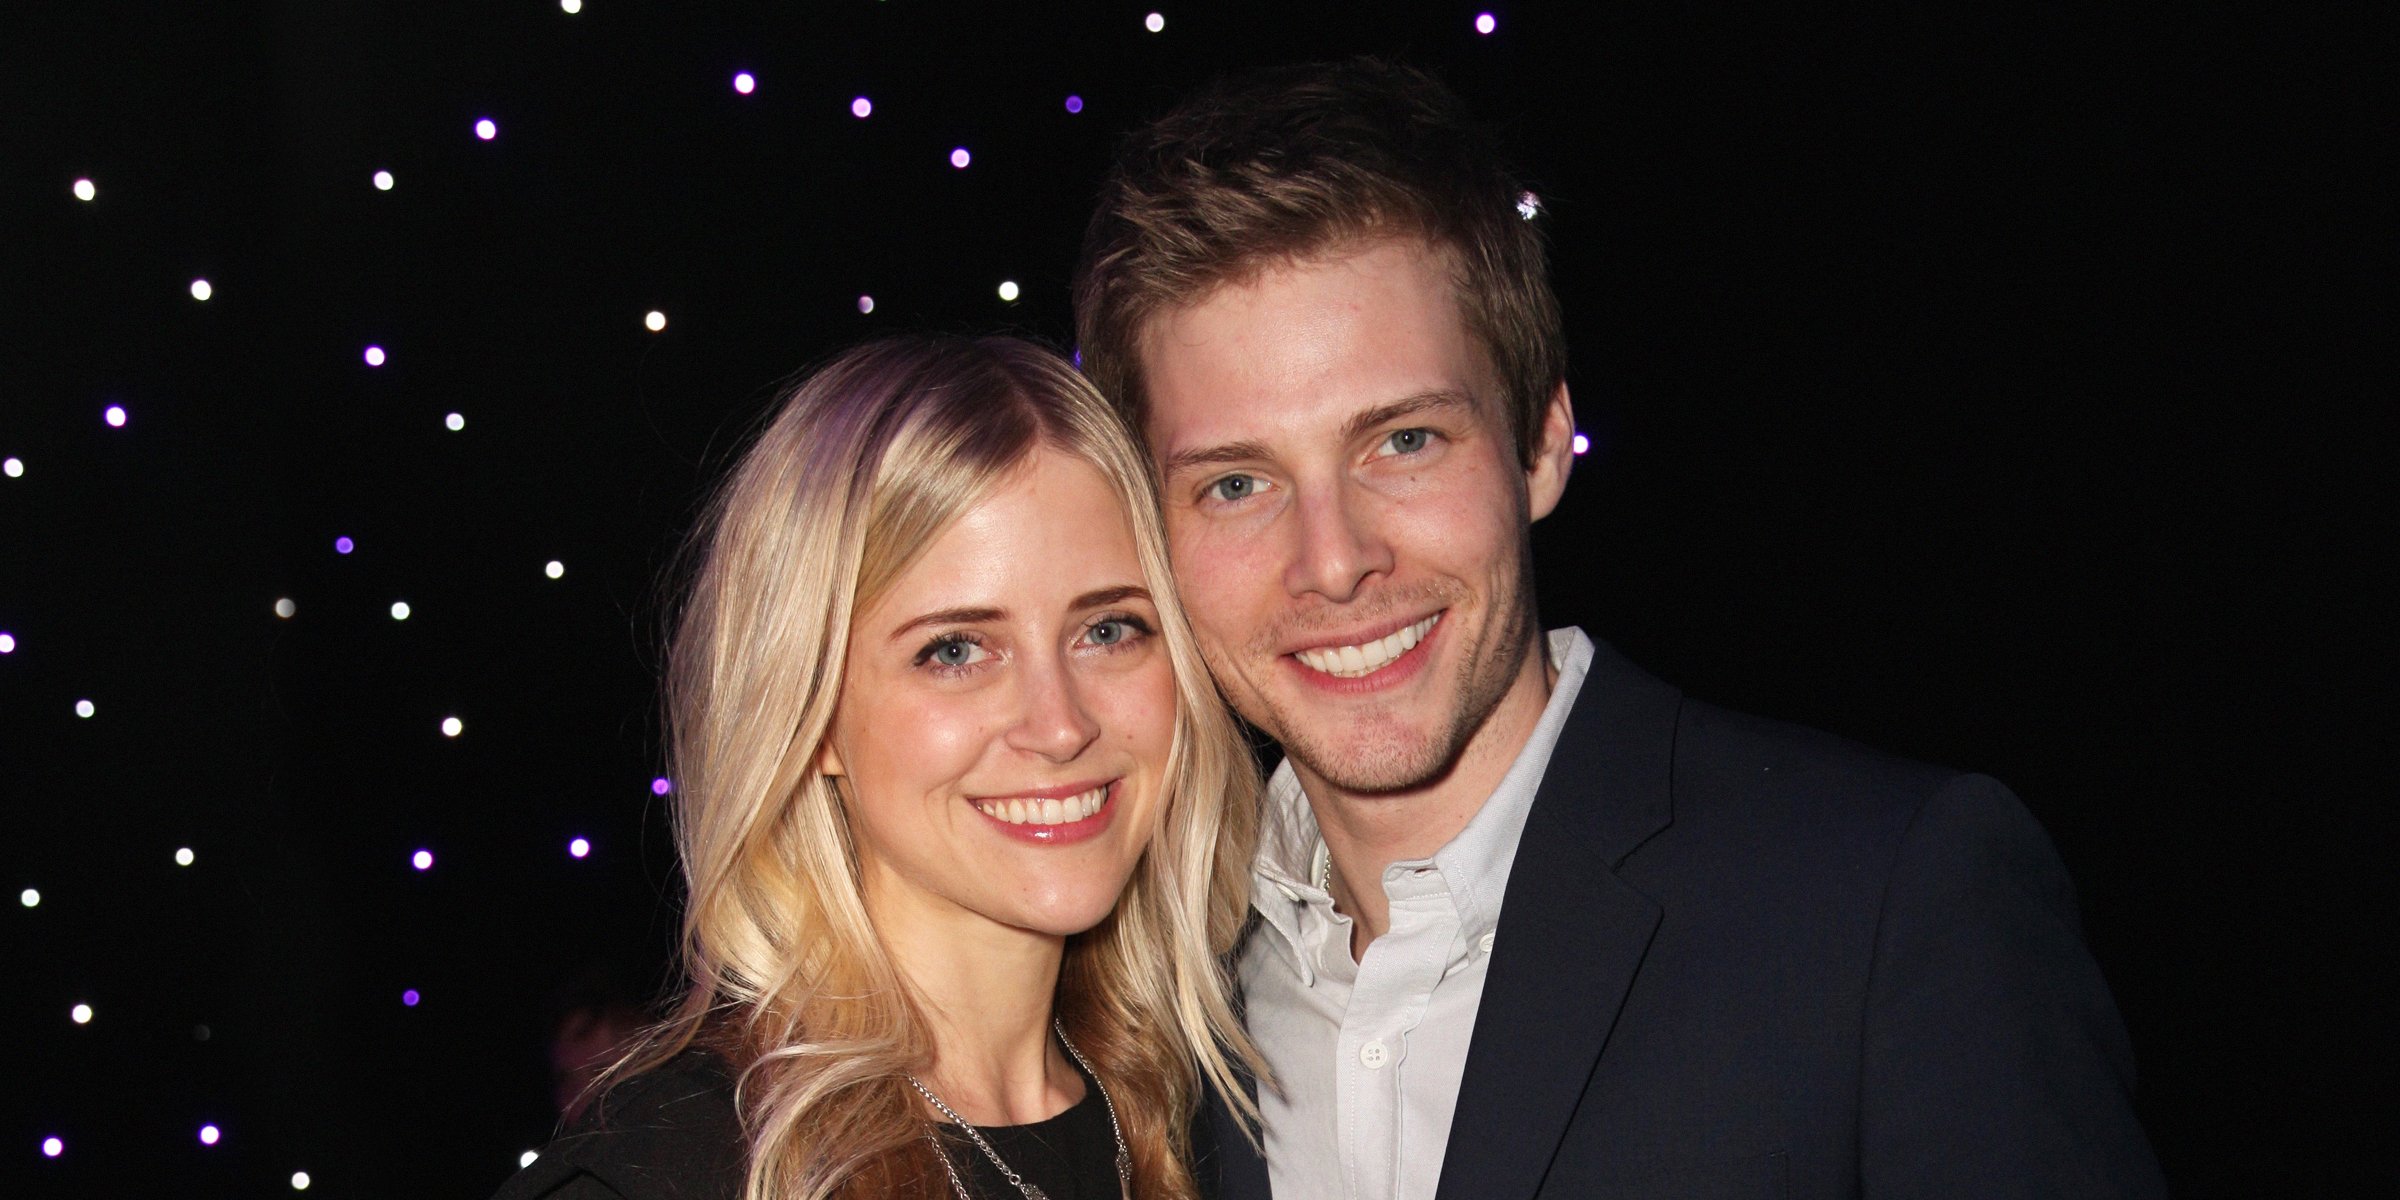 Hunter Parrish and Kathryn Wahl | Source: Getty Images